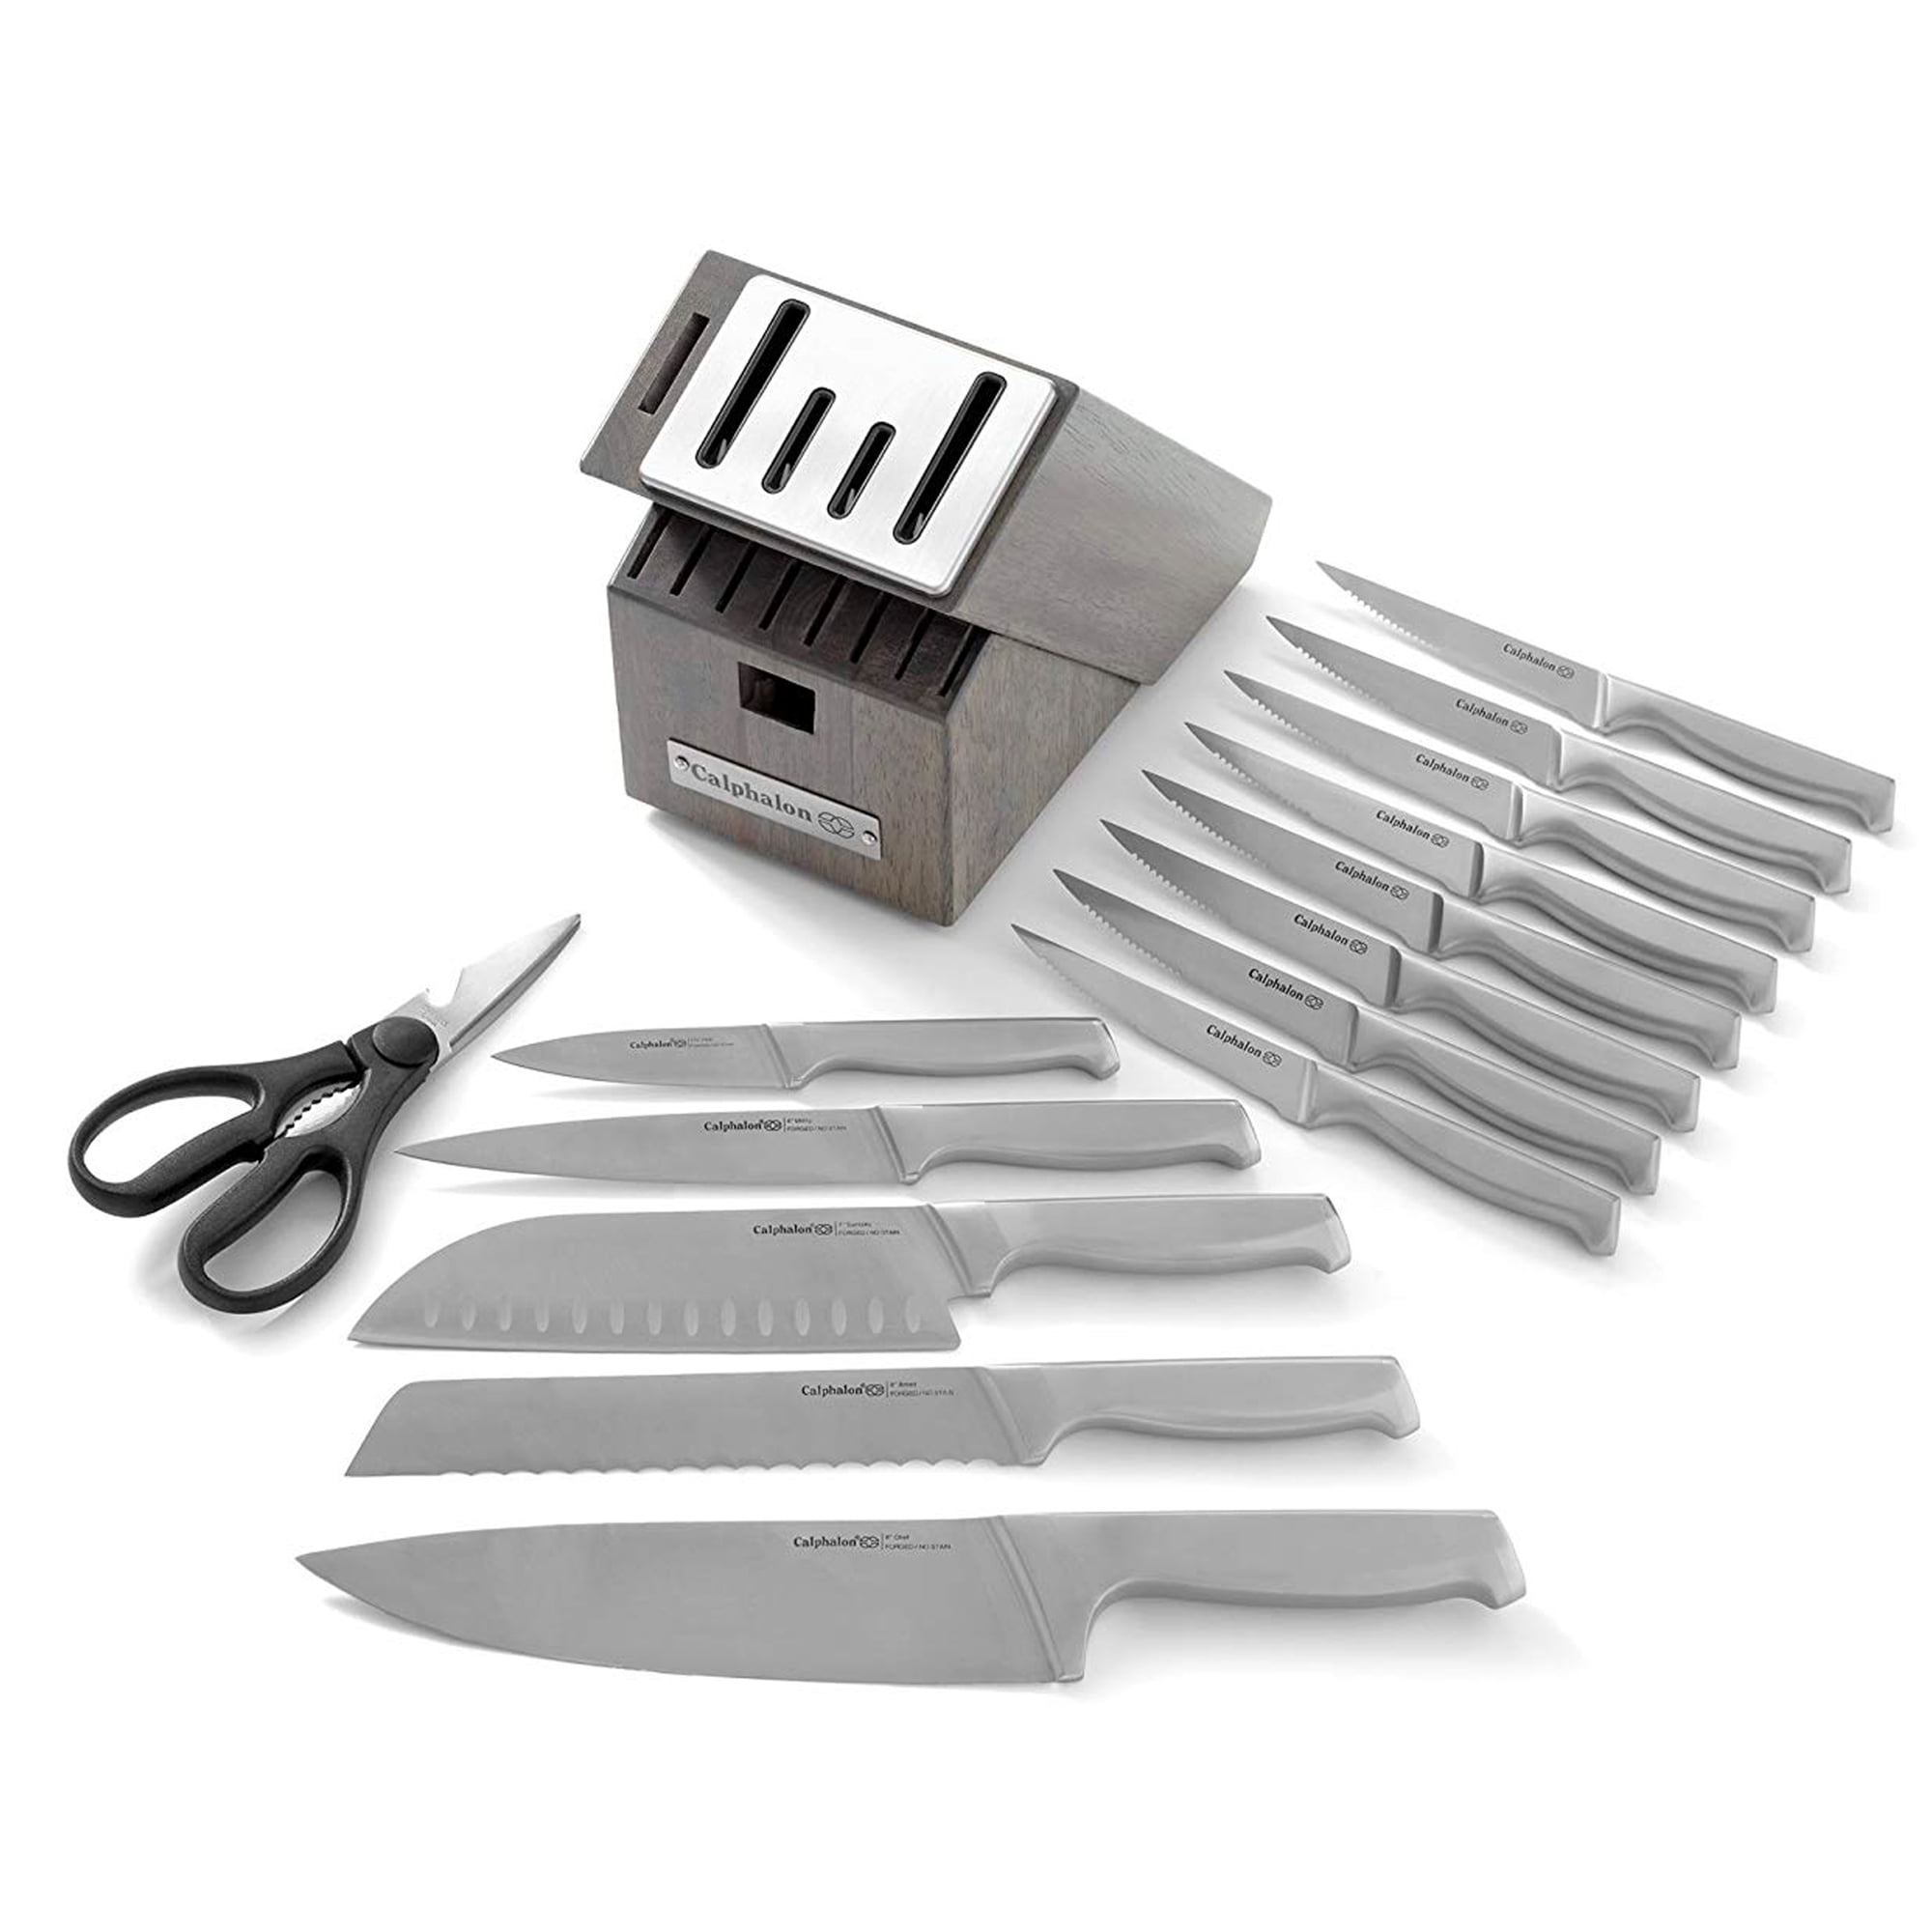 Calphalon Precision 15-Piece Self-Sharpening Knife and Block Set with Sharp  in Technology 1932941 - The Home Depot